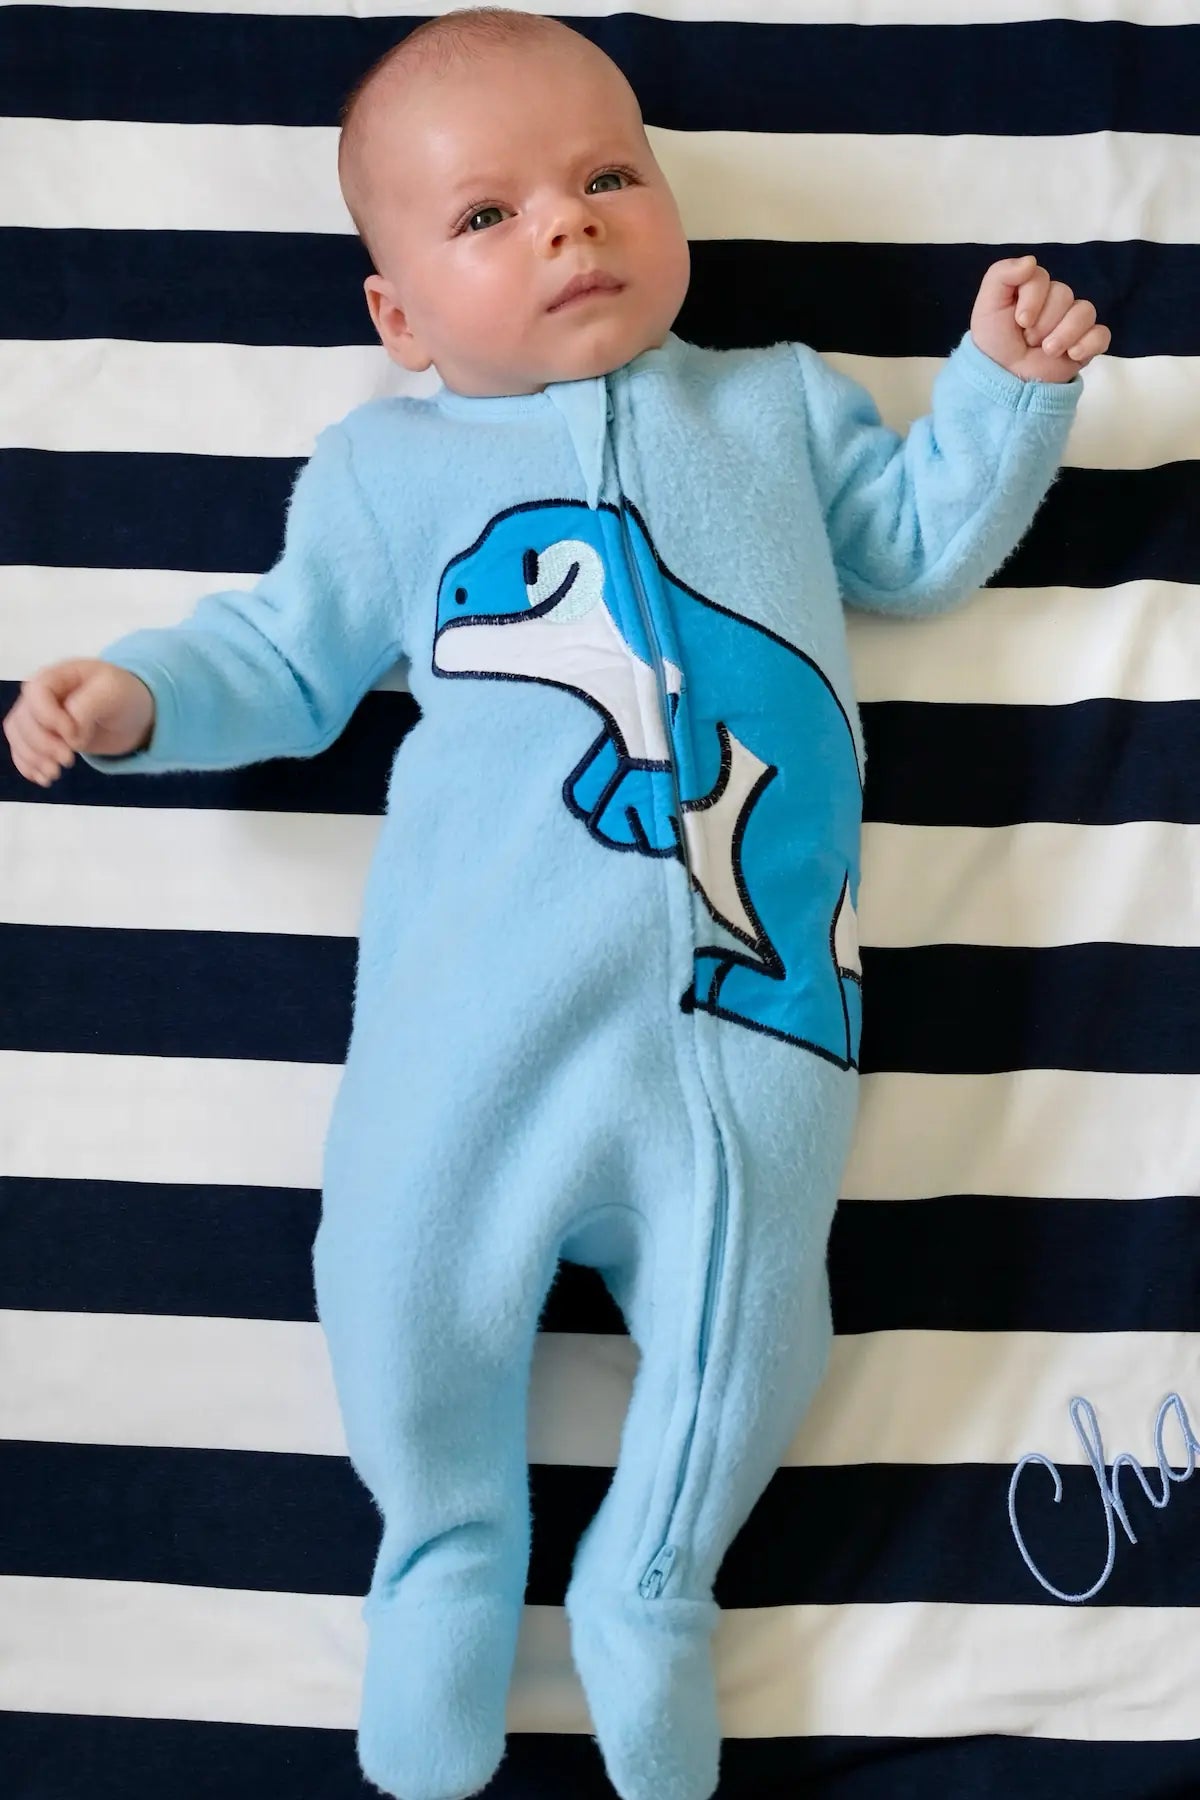 Baby wearing Blue Dino print romper laying on striped blanket